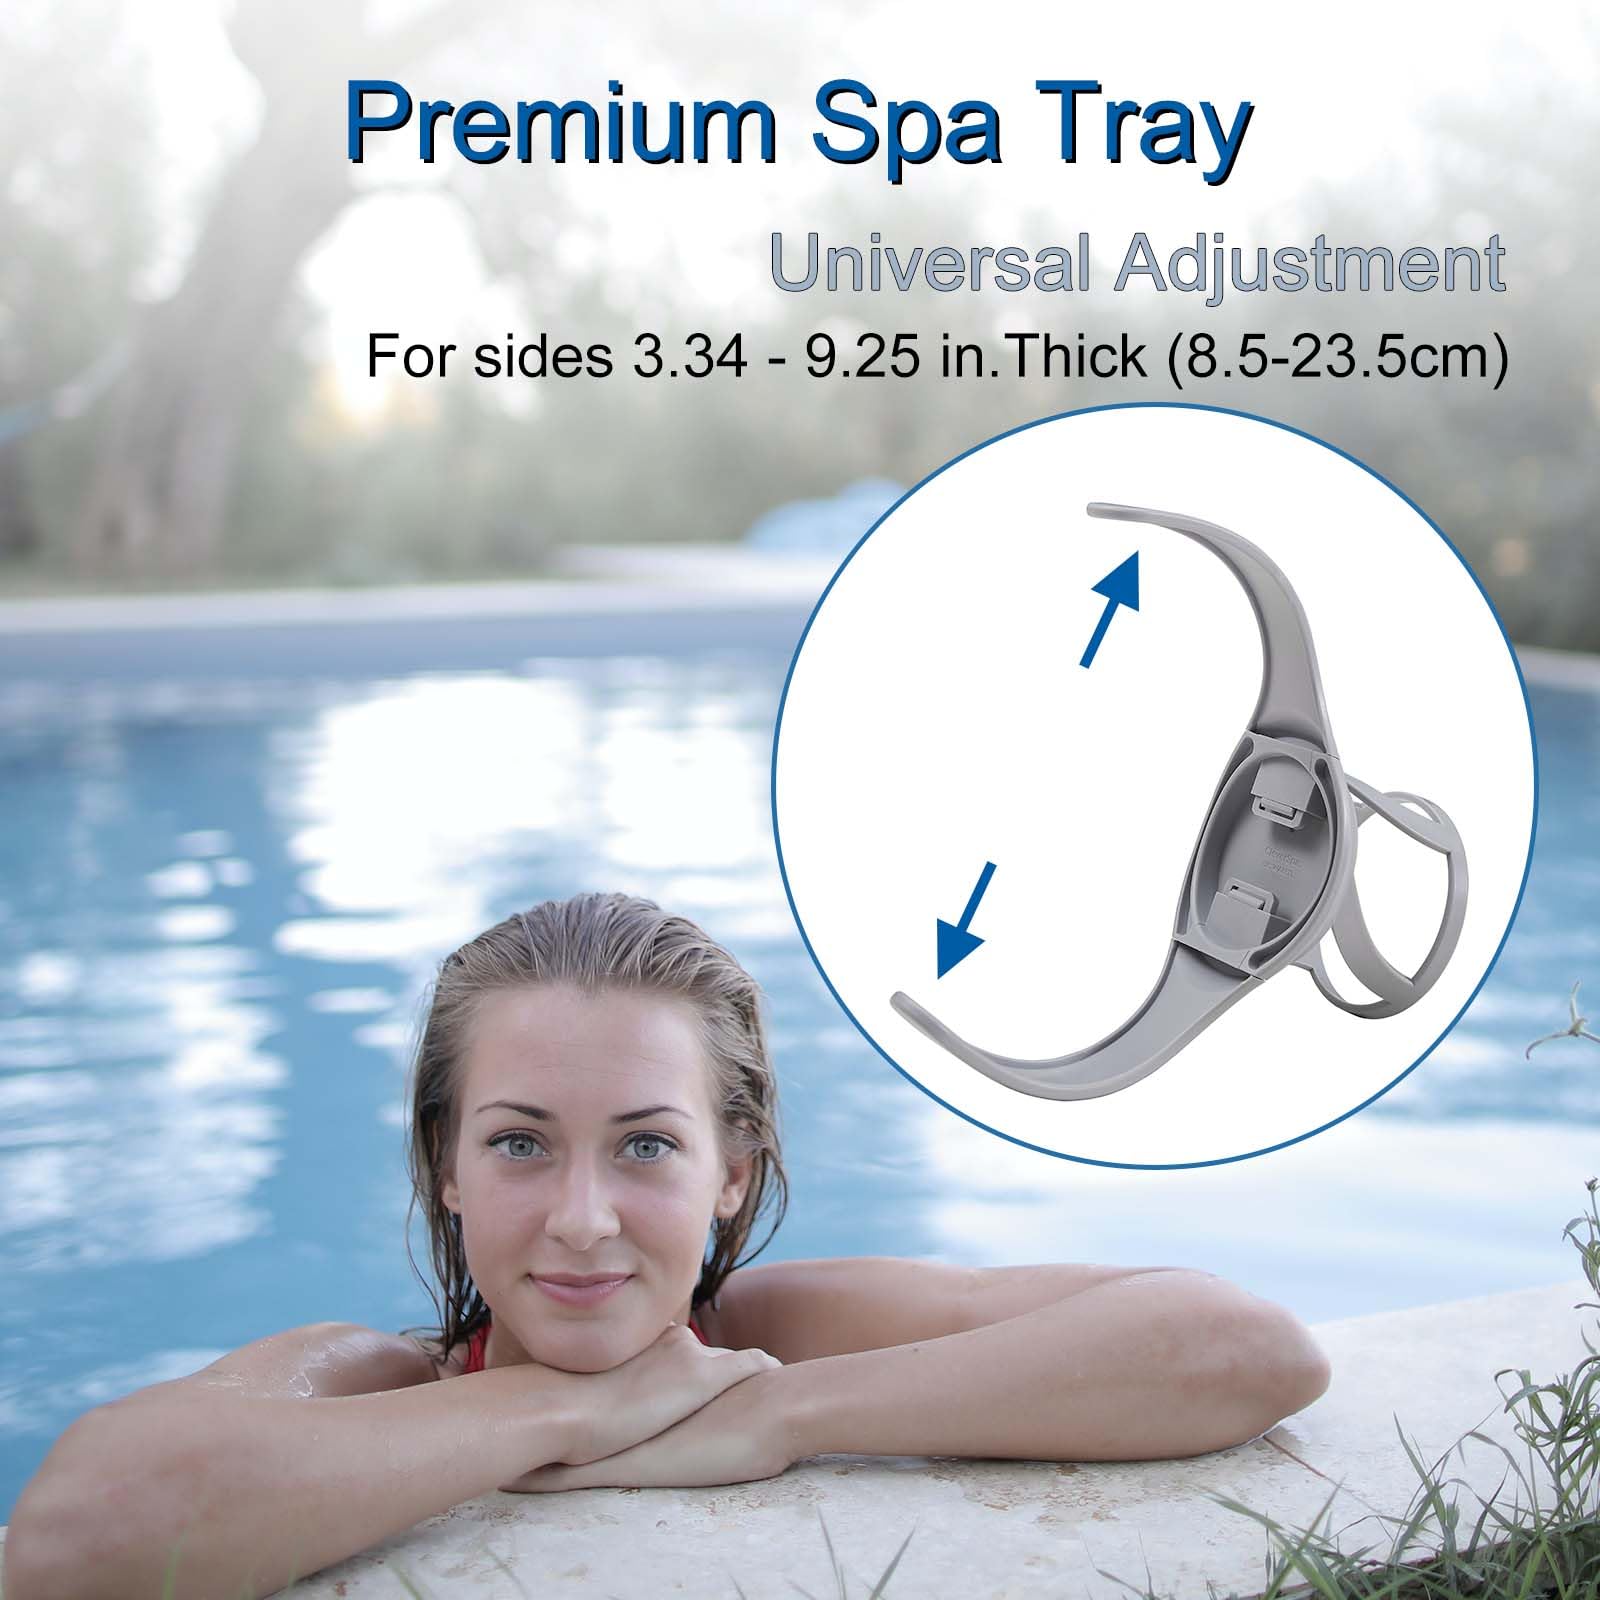 Relxtime Pool Cup Holder, Detachable Drink Cup Holder,Hot Tub Spa Pool Accessories,Suitable For Most Inflatable Spa Pools/Tubs(Grey)